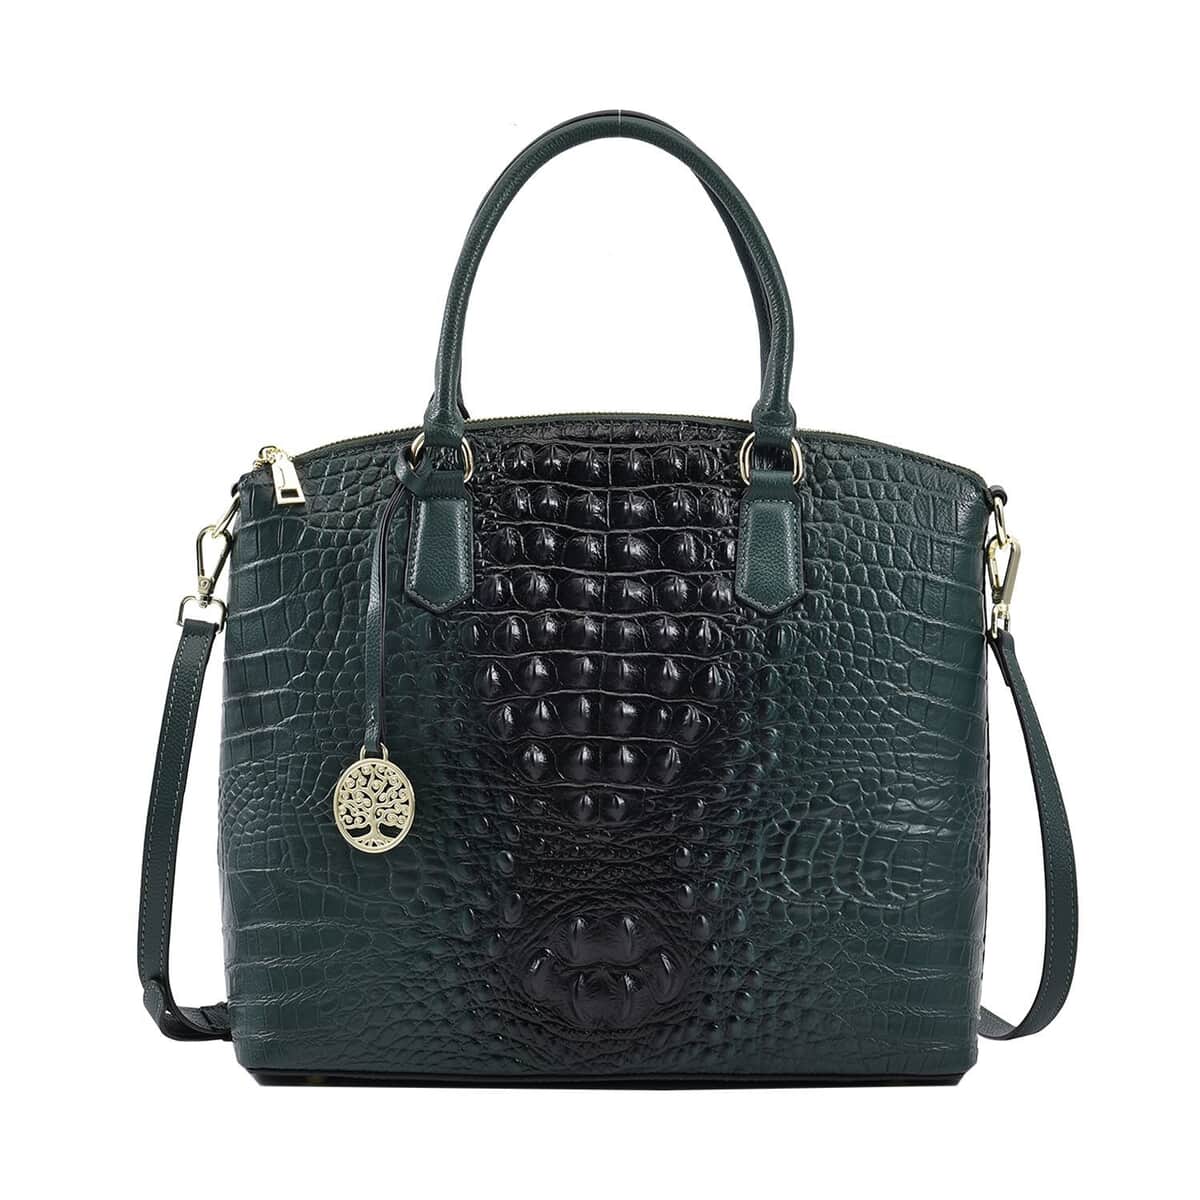 THE MONACO Dark Green with Black Croco Embossed Genuine Leather Tote Bag (12.99"x4.88"x11.6") with Handle Drop and Detachable Long Strap image number 0